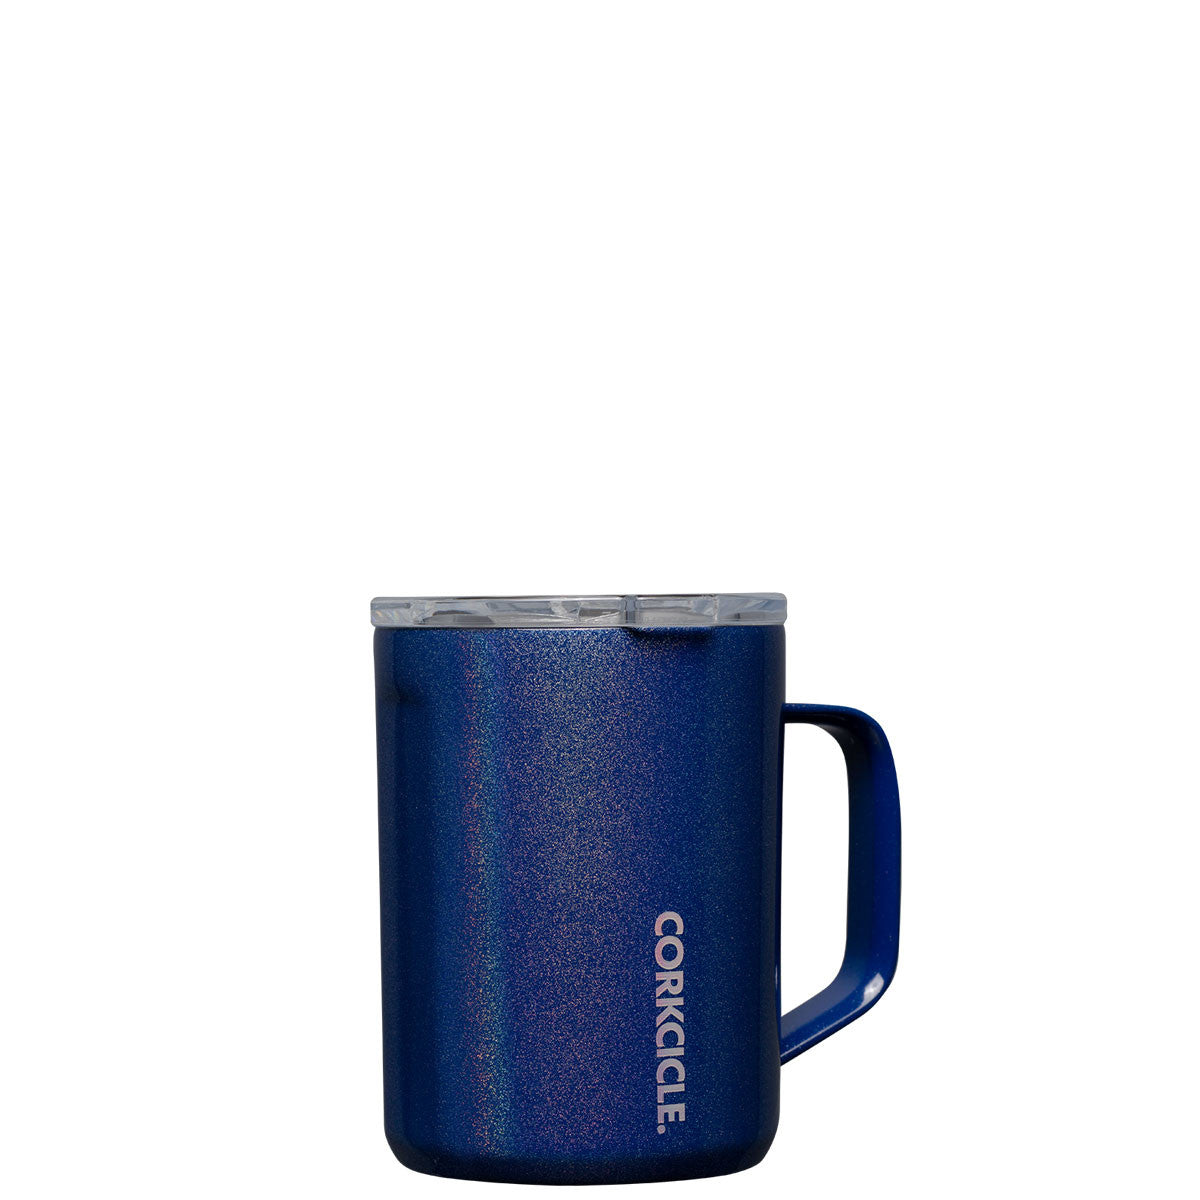 Midnight Magic 16 oz Stainless Steel Travel Mug by Corkcicle